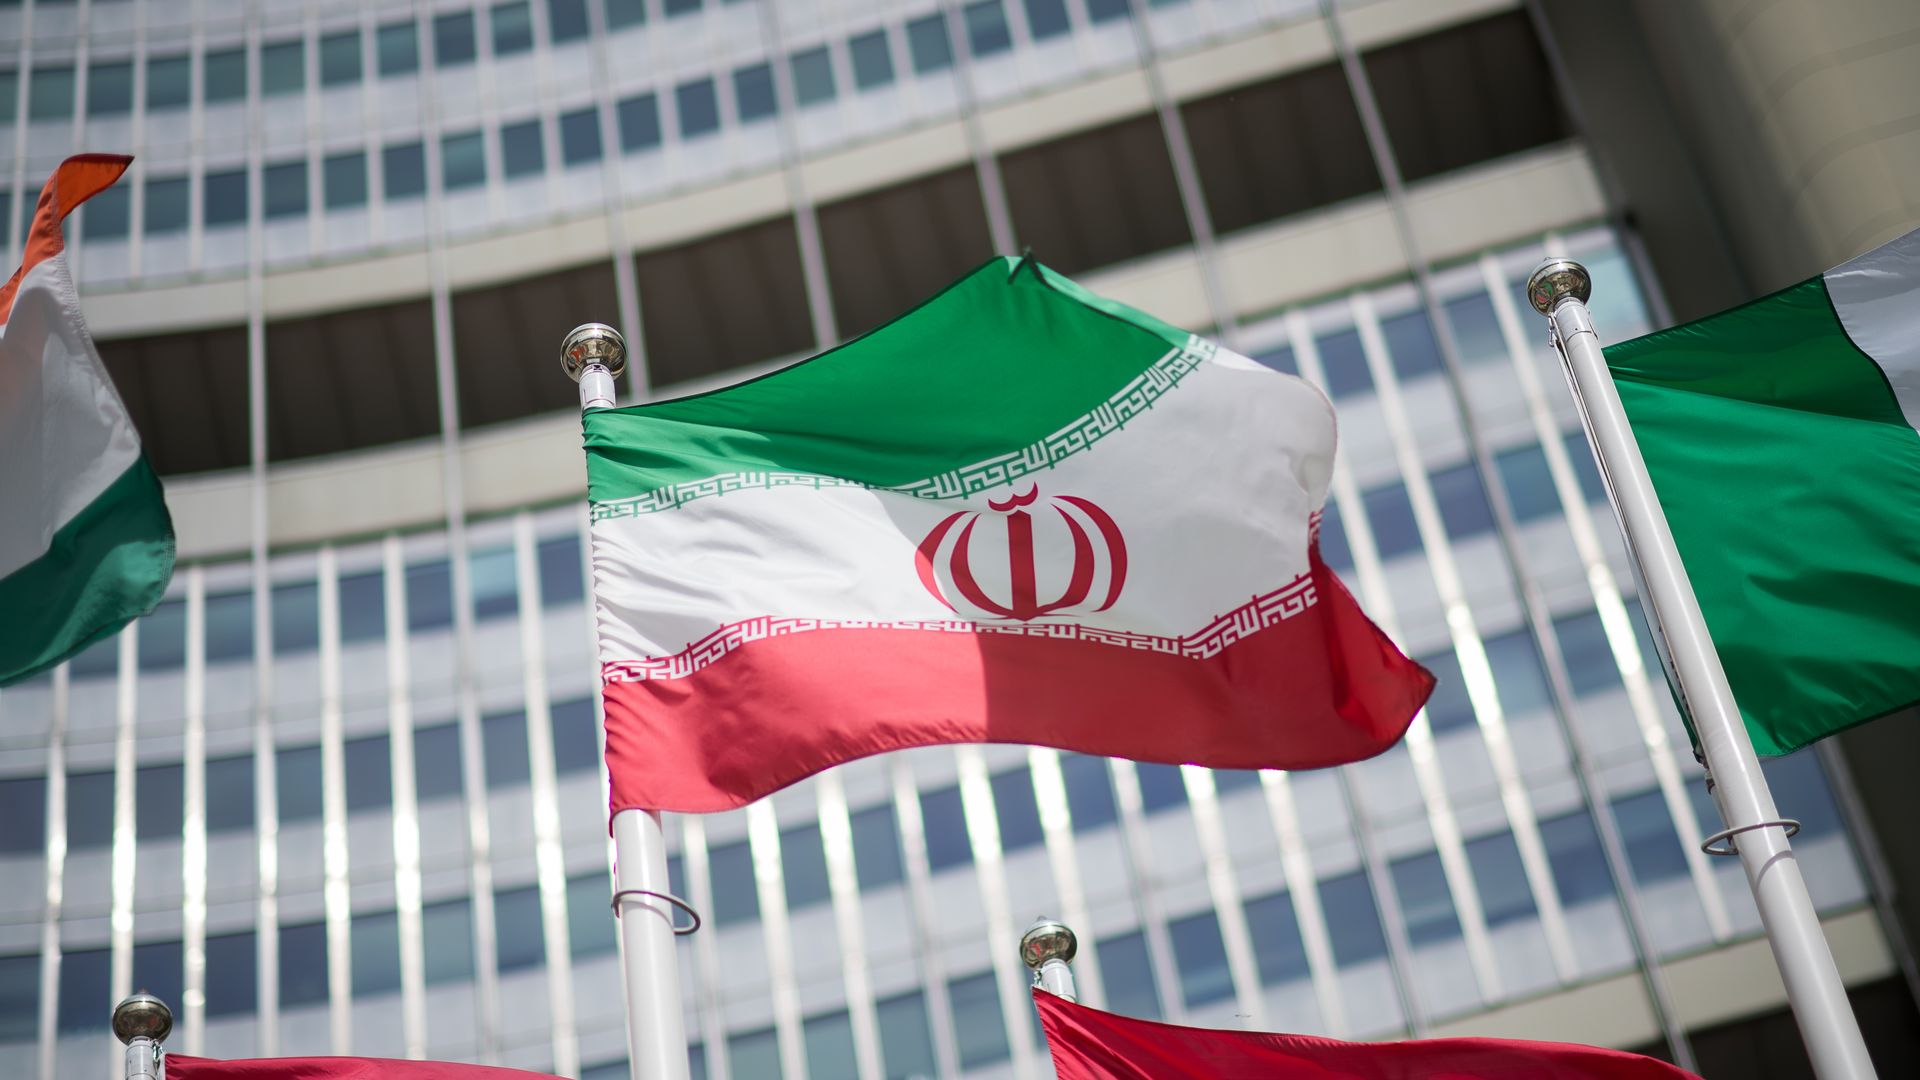 The flag of Iran is seen in front of the International Atomic Energy Agency (IAEA) Headquarters in Vienna.